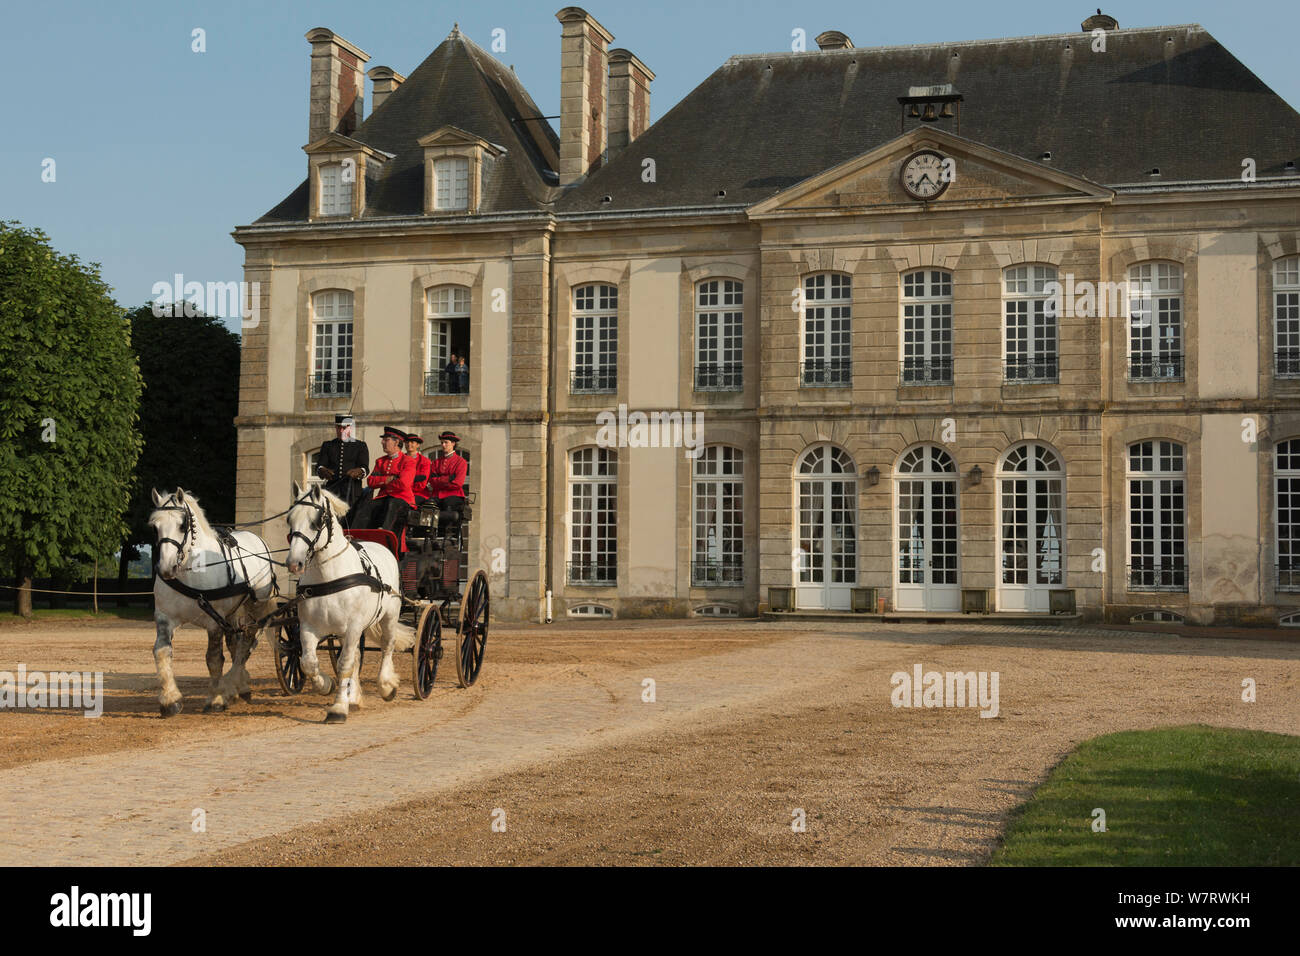 The drivingr (in black) and grooms (in red) from the Haras Du Pin, France's oldest national stud, driving two Percheron horses, harnessed to a break, in the Cour D'Honneur, at Le Pin-au-Haras, Orne, Lower Normandy, France. July 2013 Stock Photo